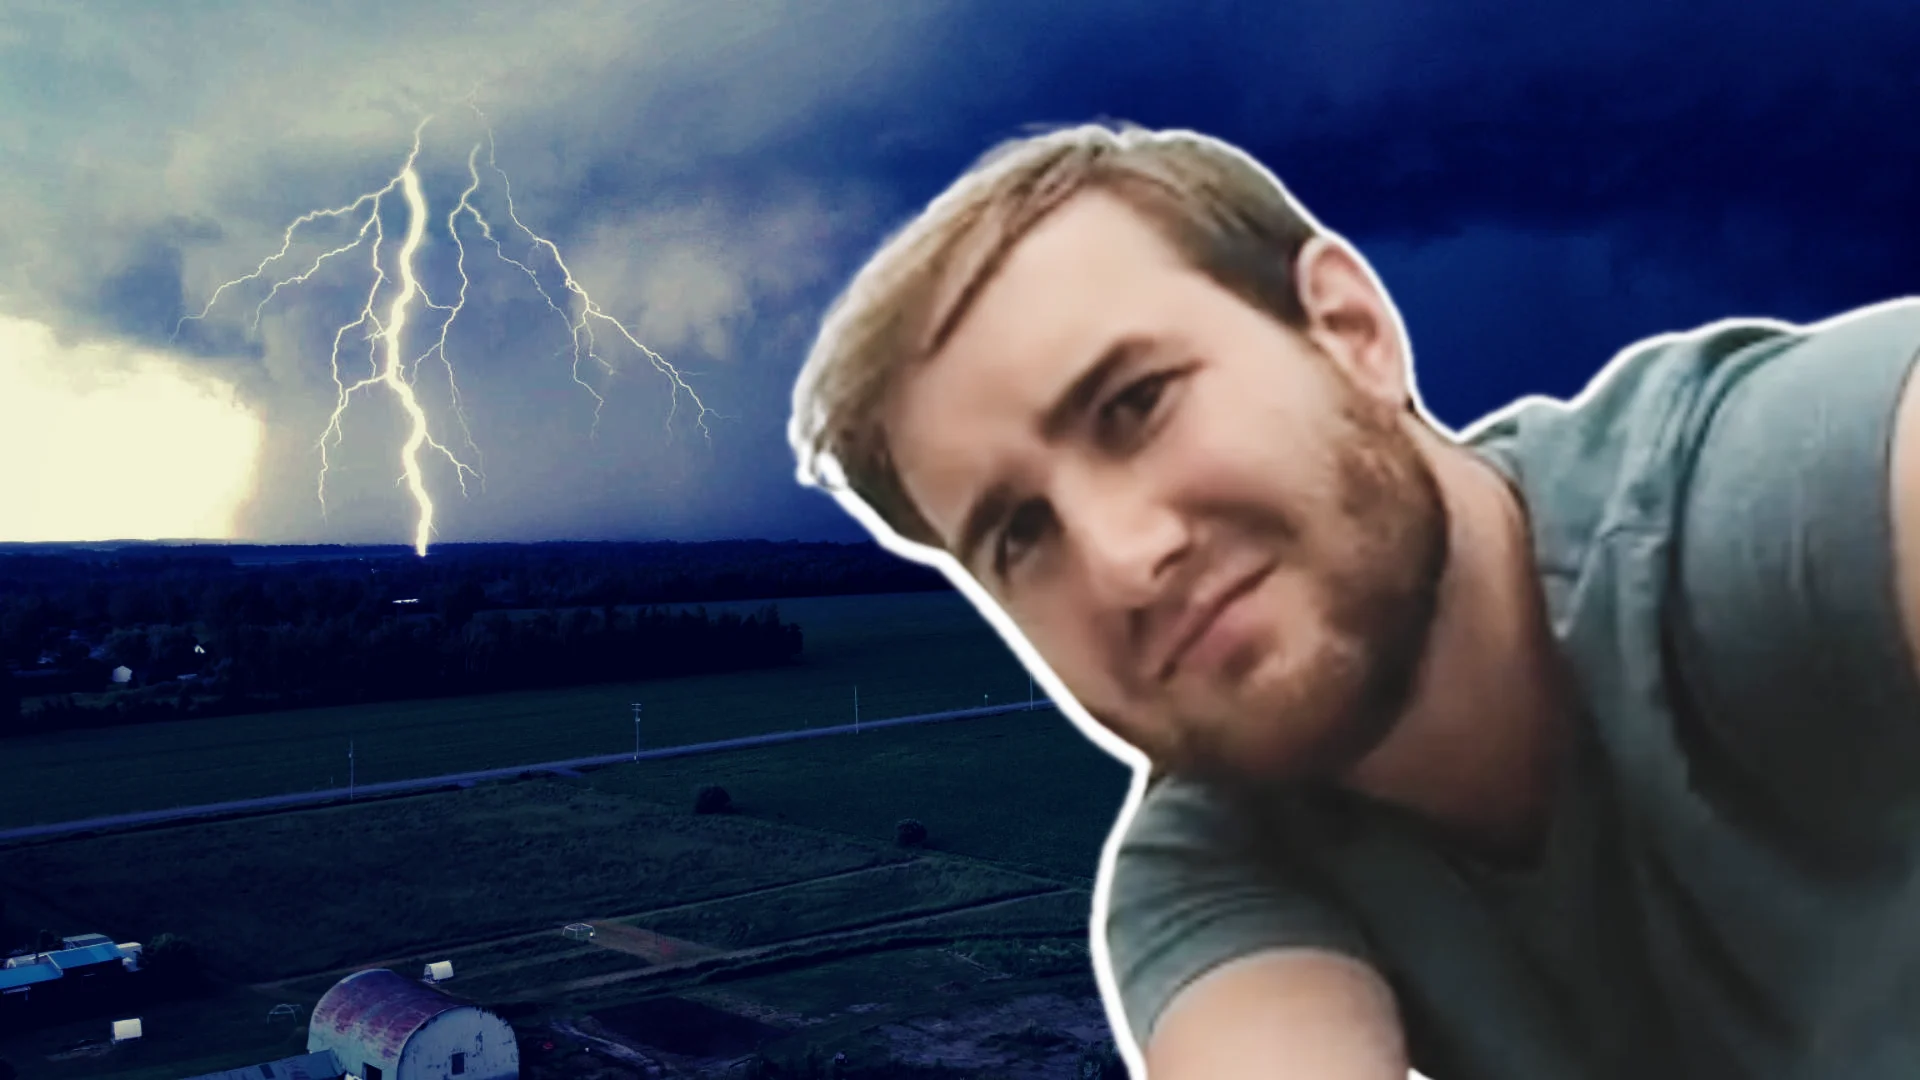 Ottawa is the capital of severe weather for this storm chaser 